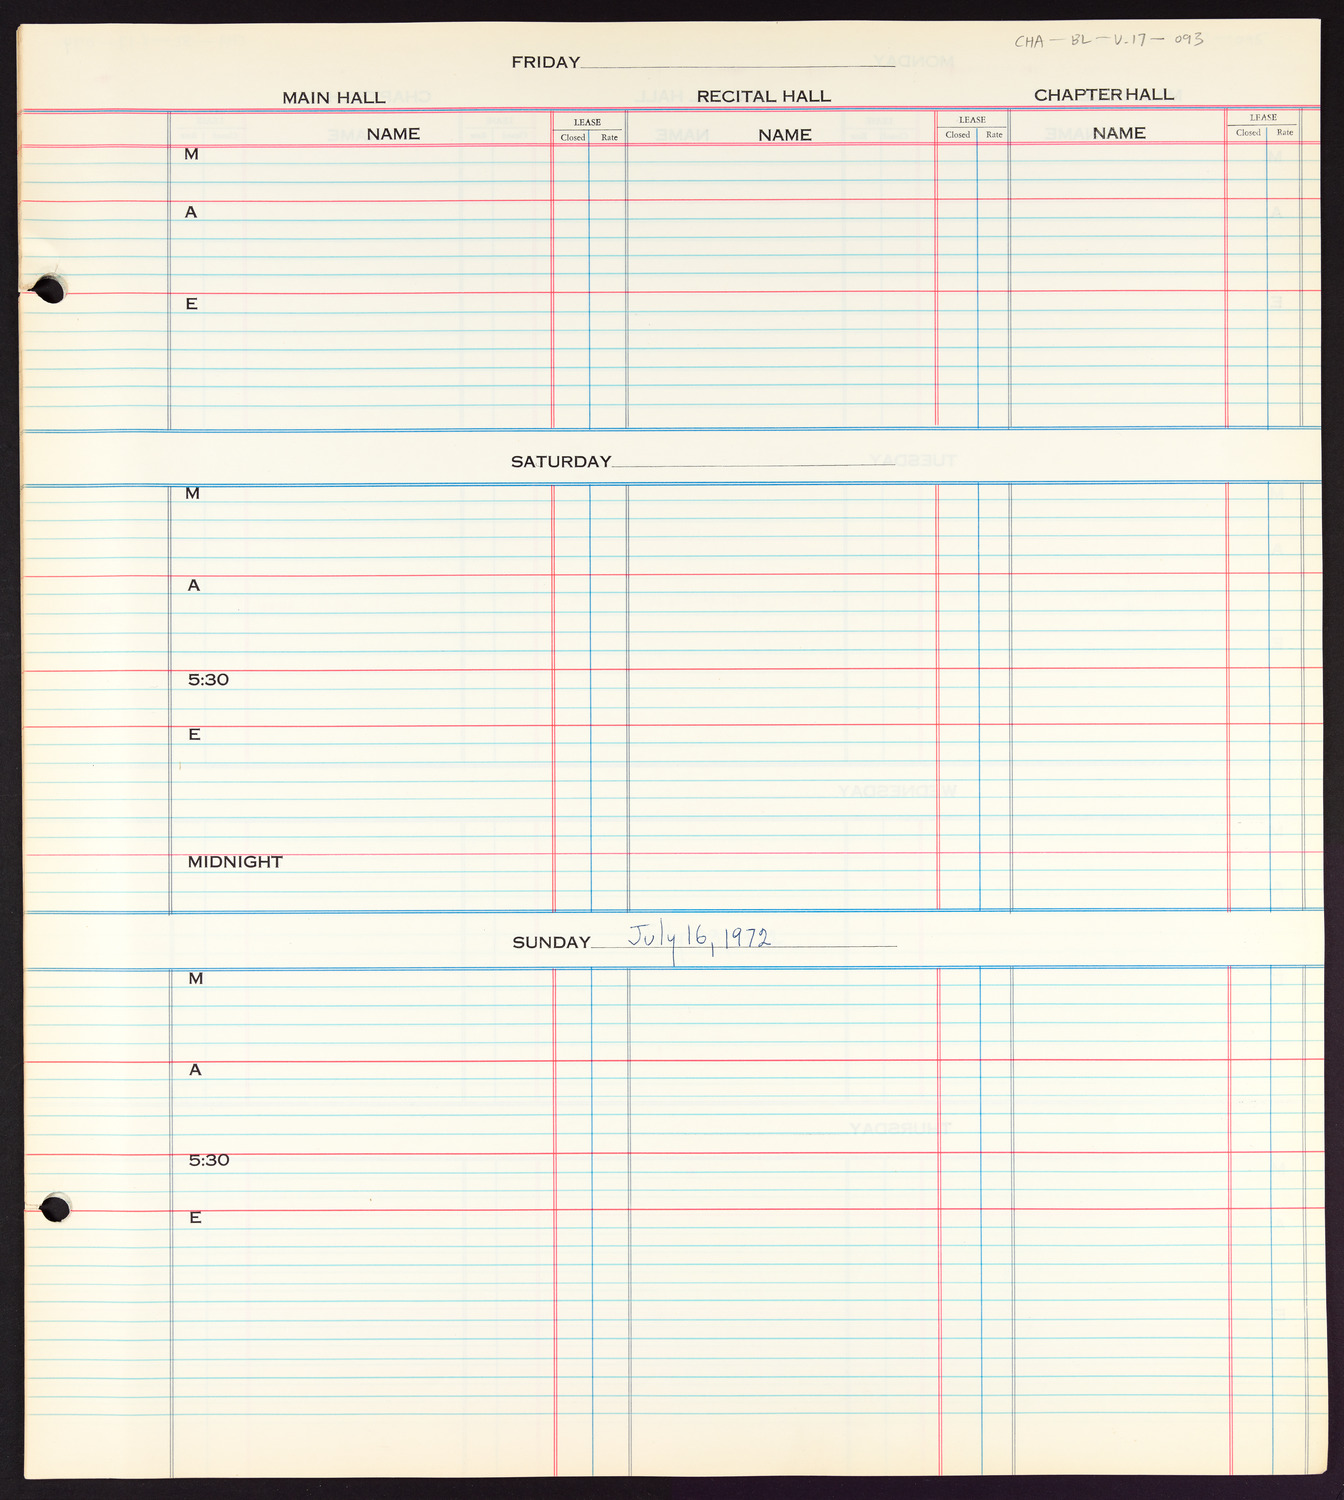 Carnegie Hall Booking Ledger, volume 17, page 93